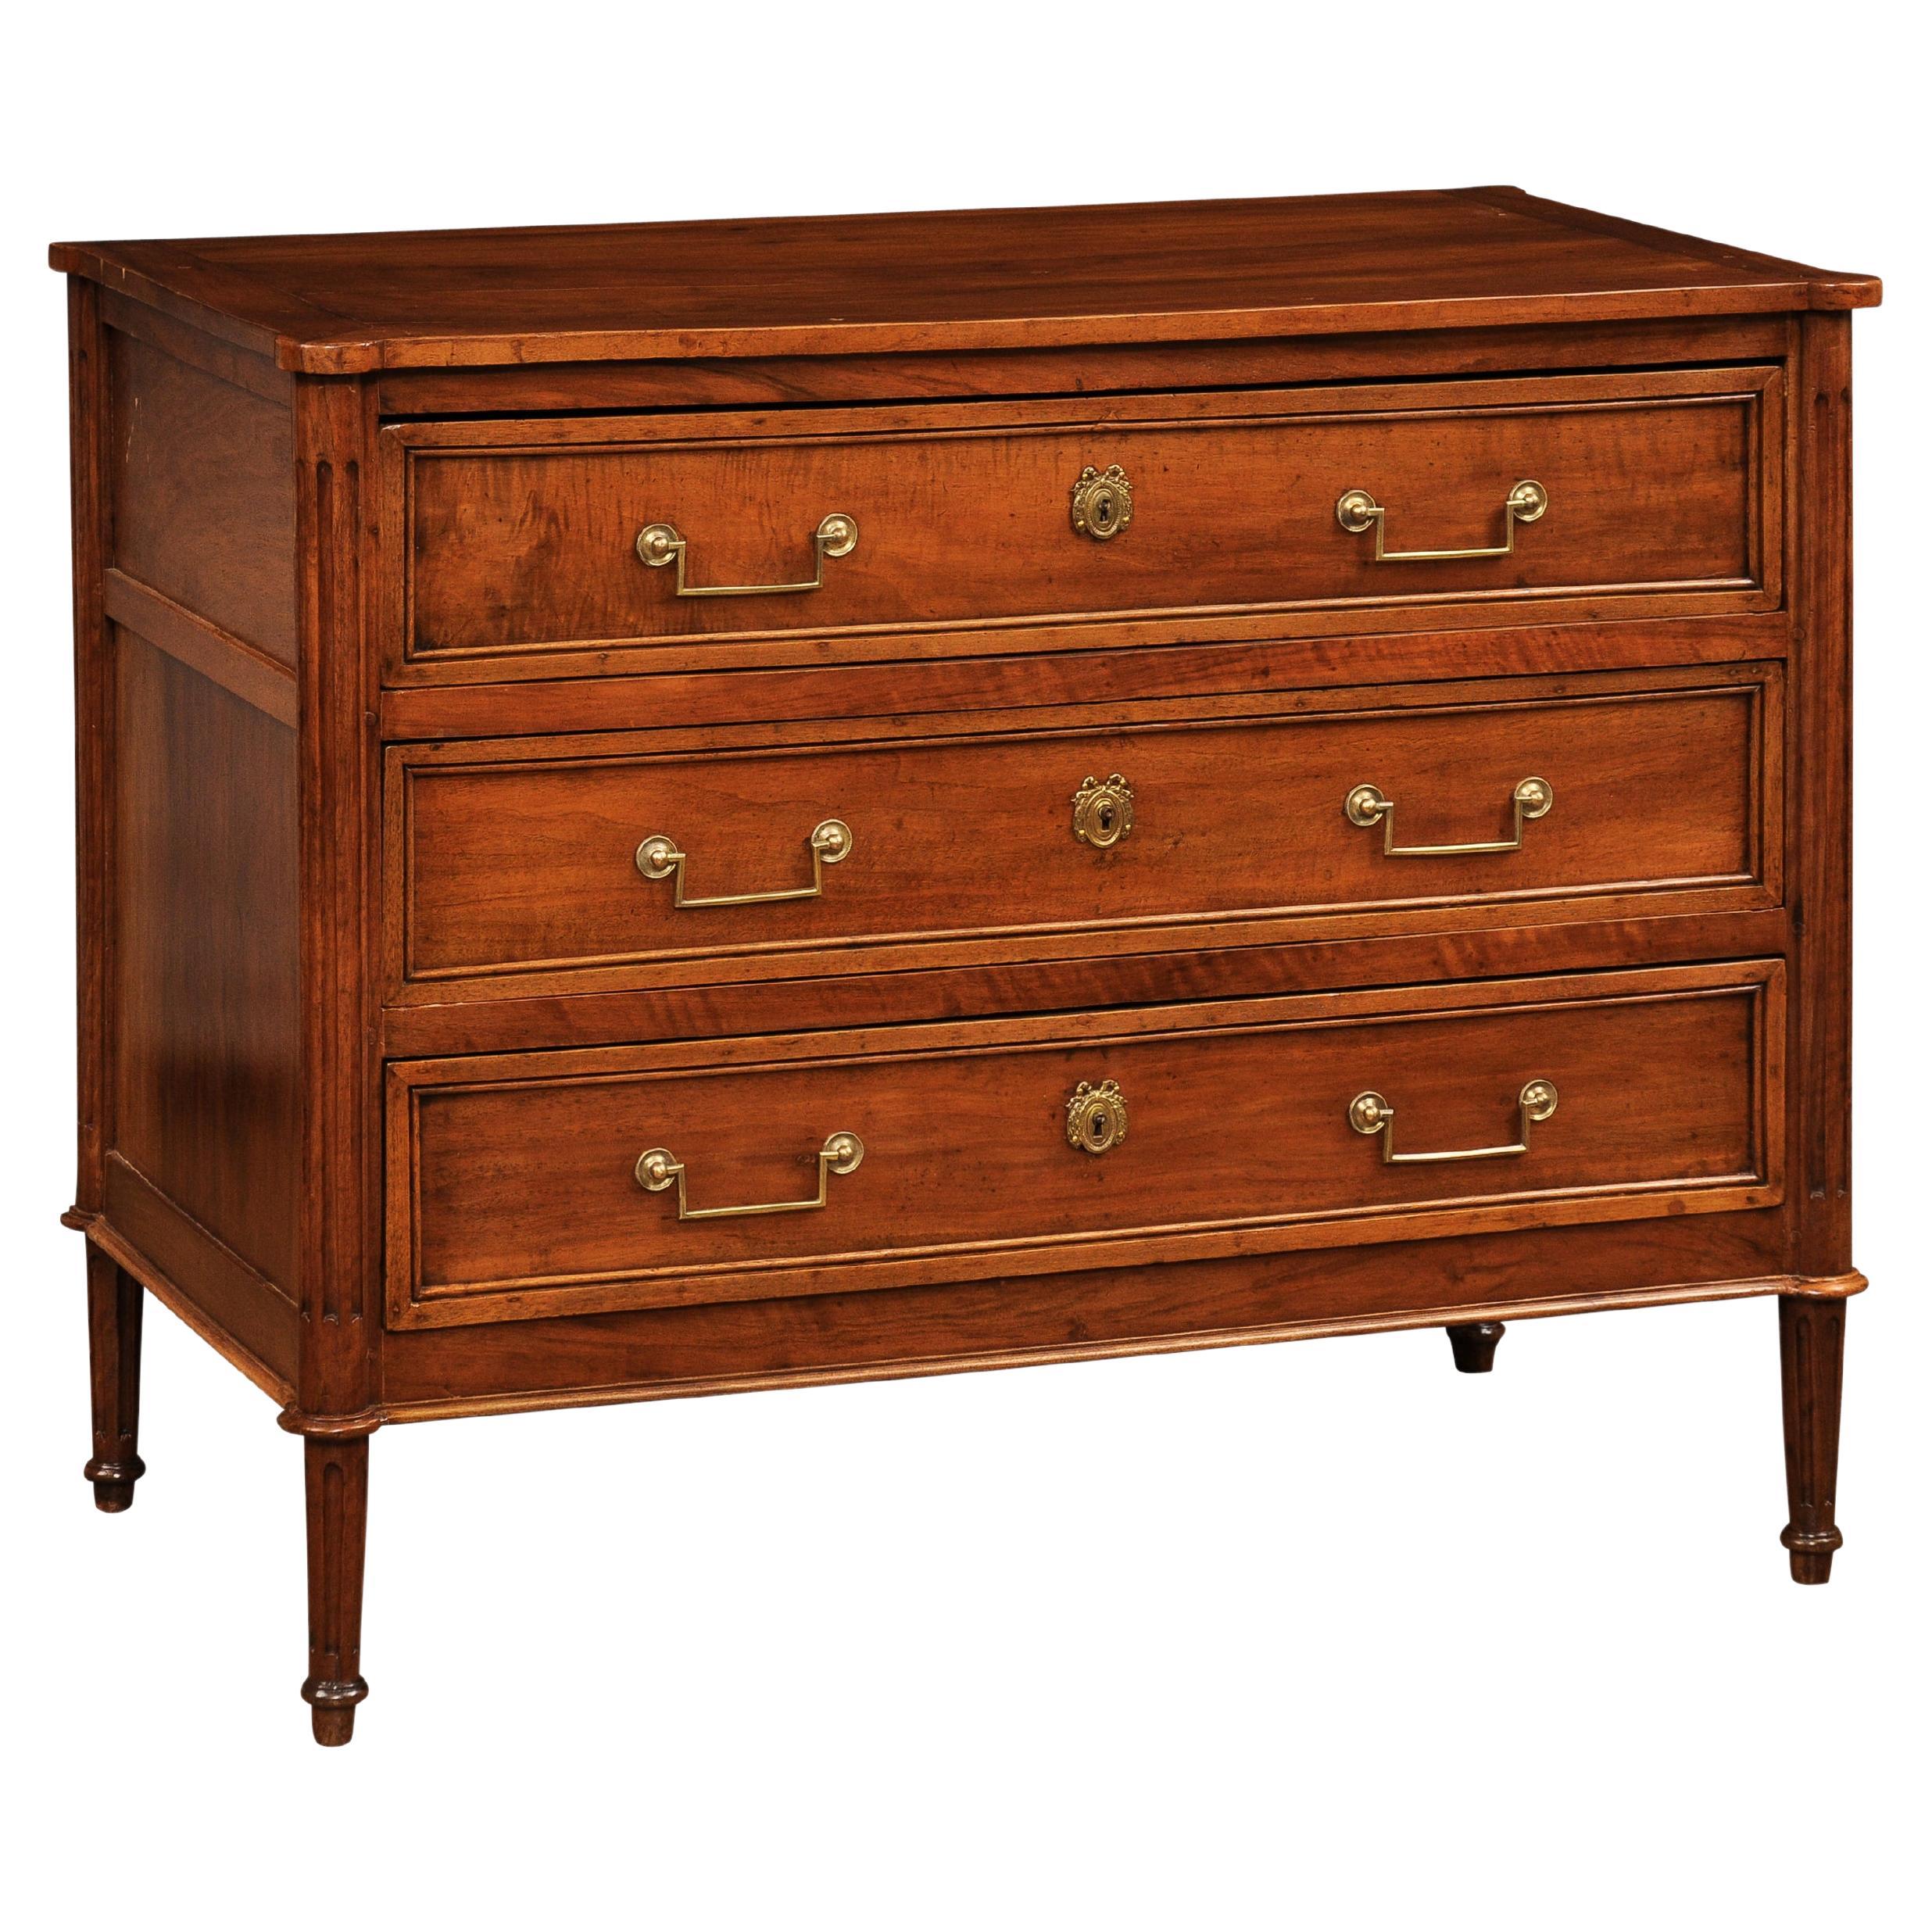 French Louis XVI Period 1790s Walnut Three Drawer Commode with Fluted Side Posts For Sale